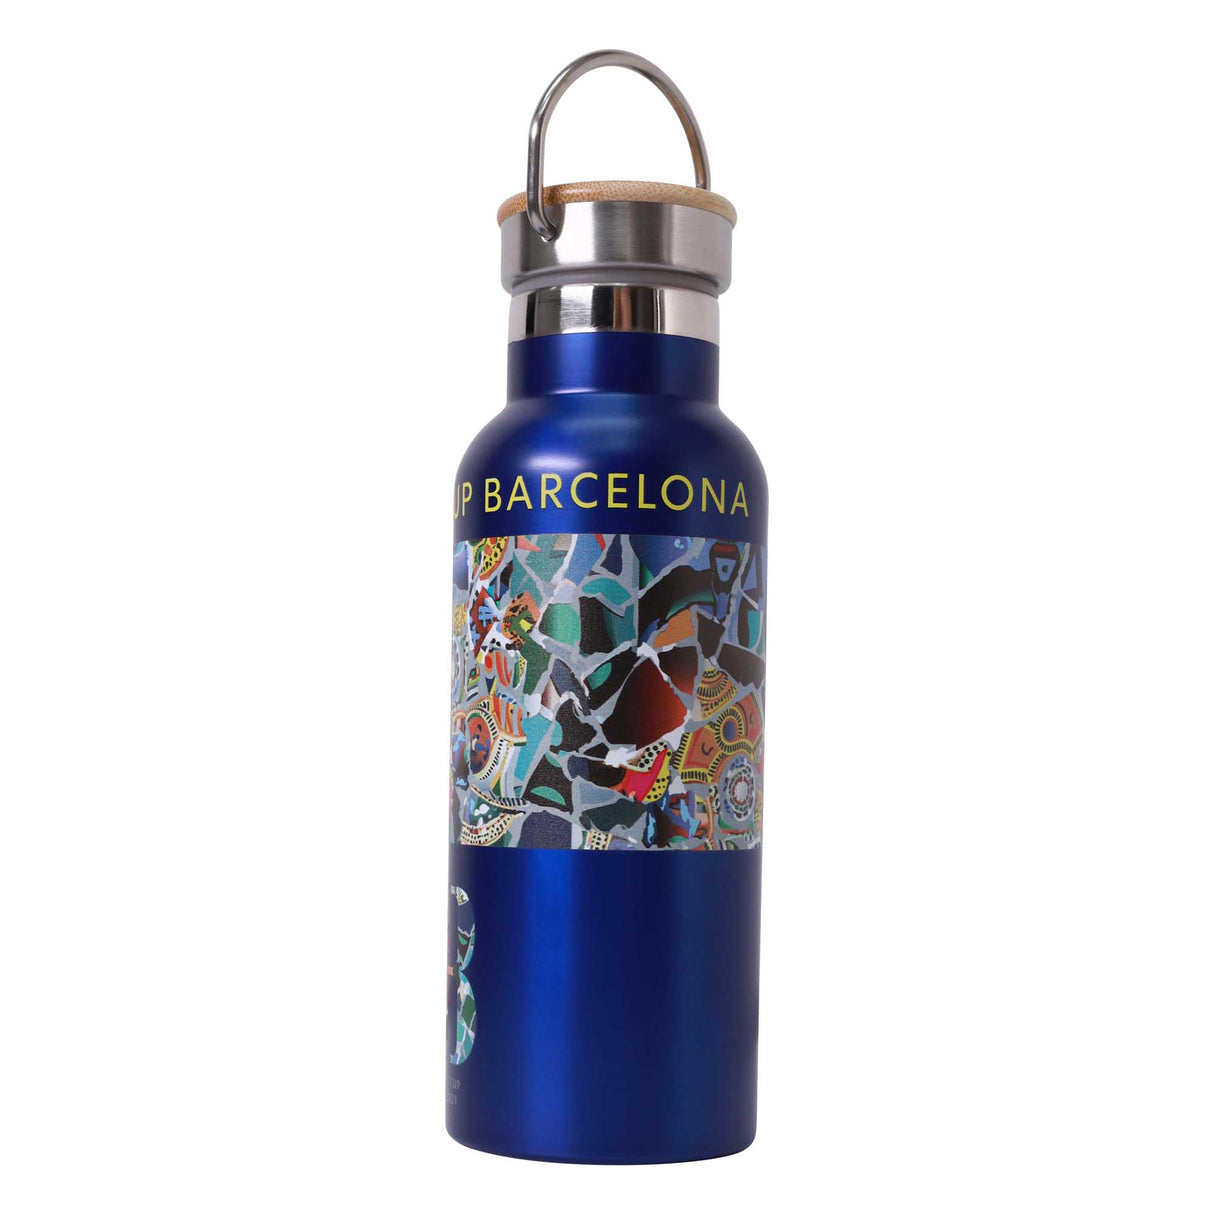 37th America’s Cup 500ml Stainless Steel Mosaic Water Bottle